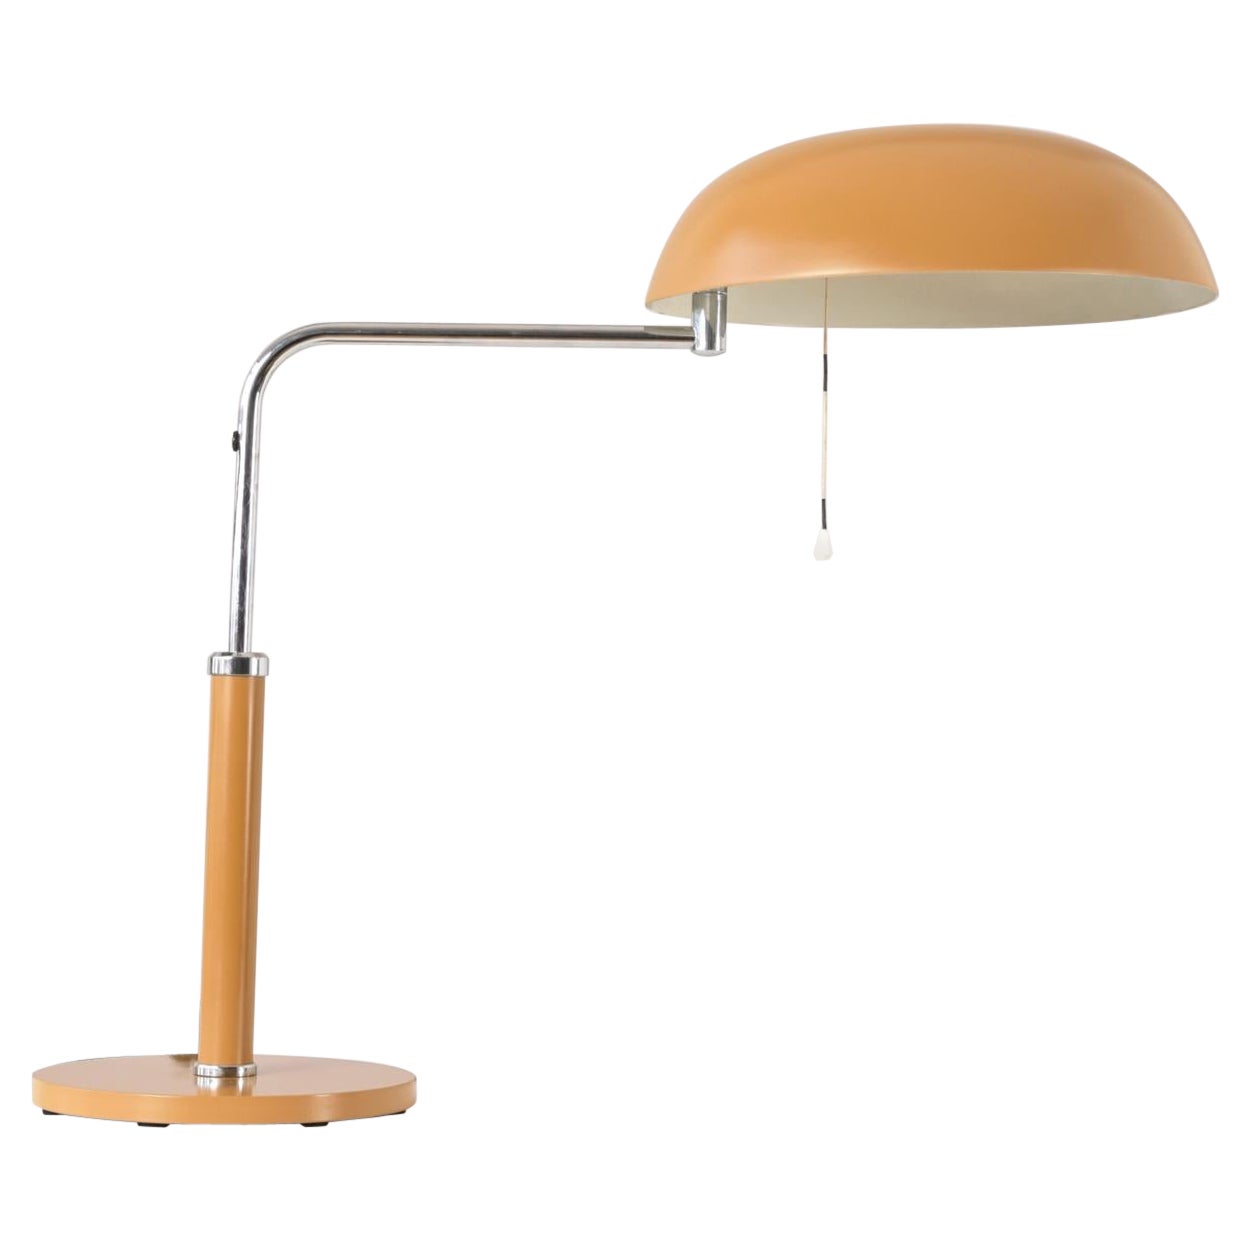 Table Lamp Quick 1500 by Alfred Müller for Amba, Switzerland - 1959